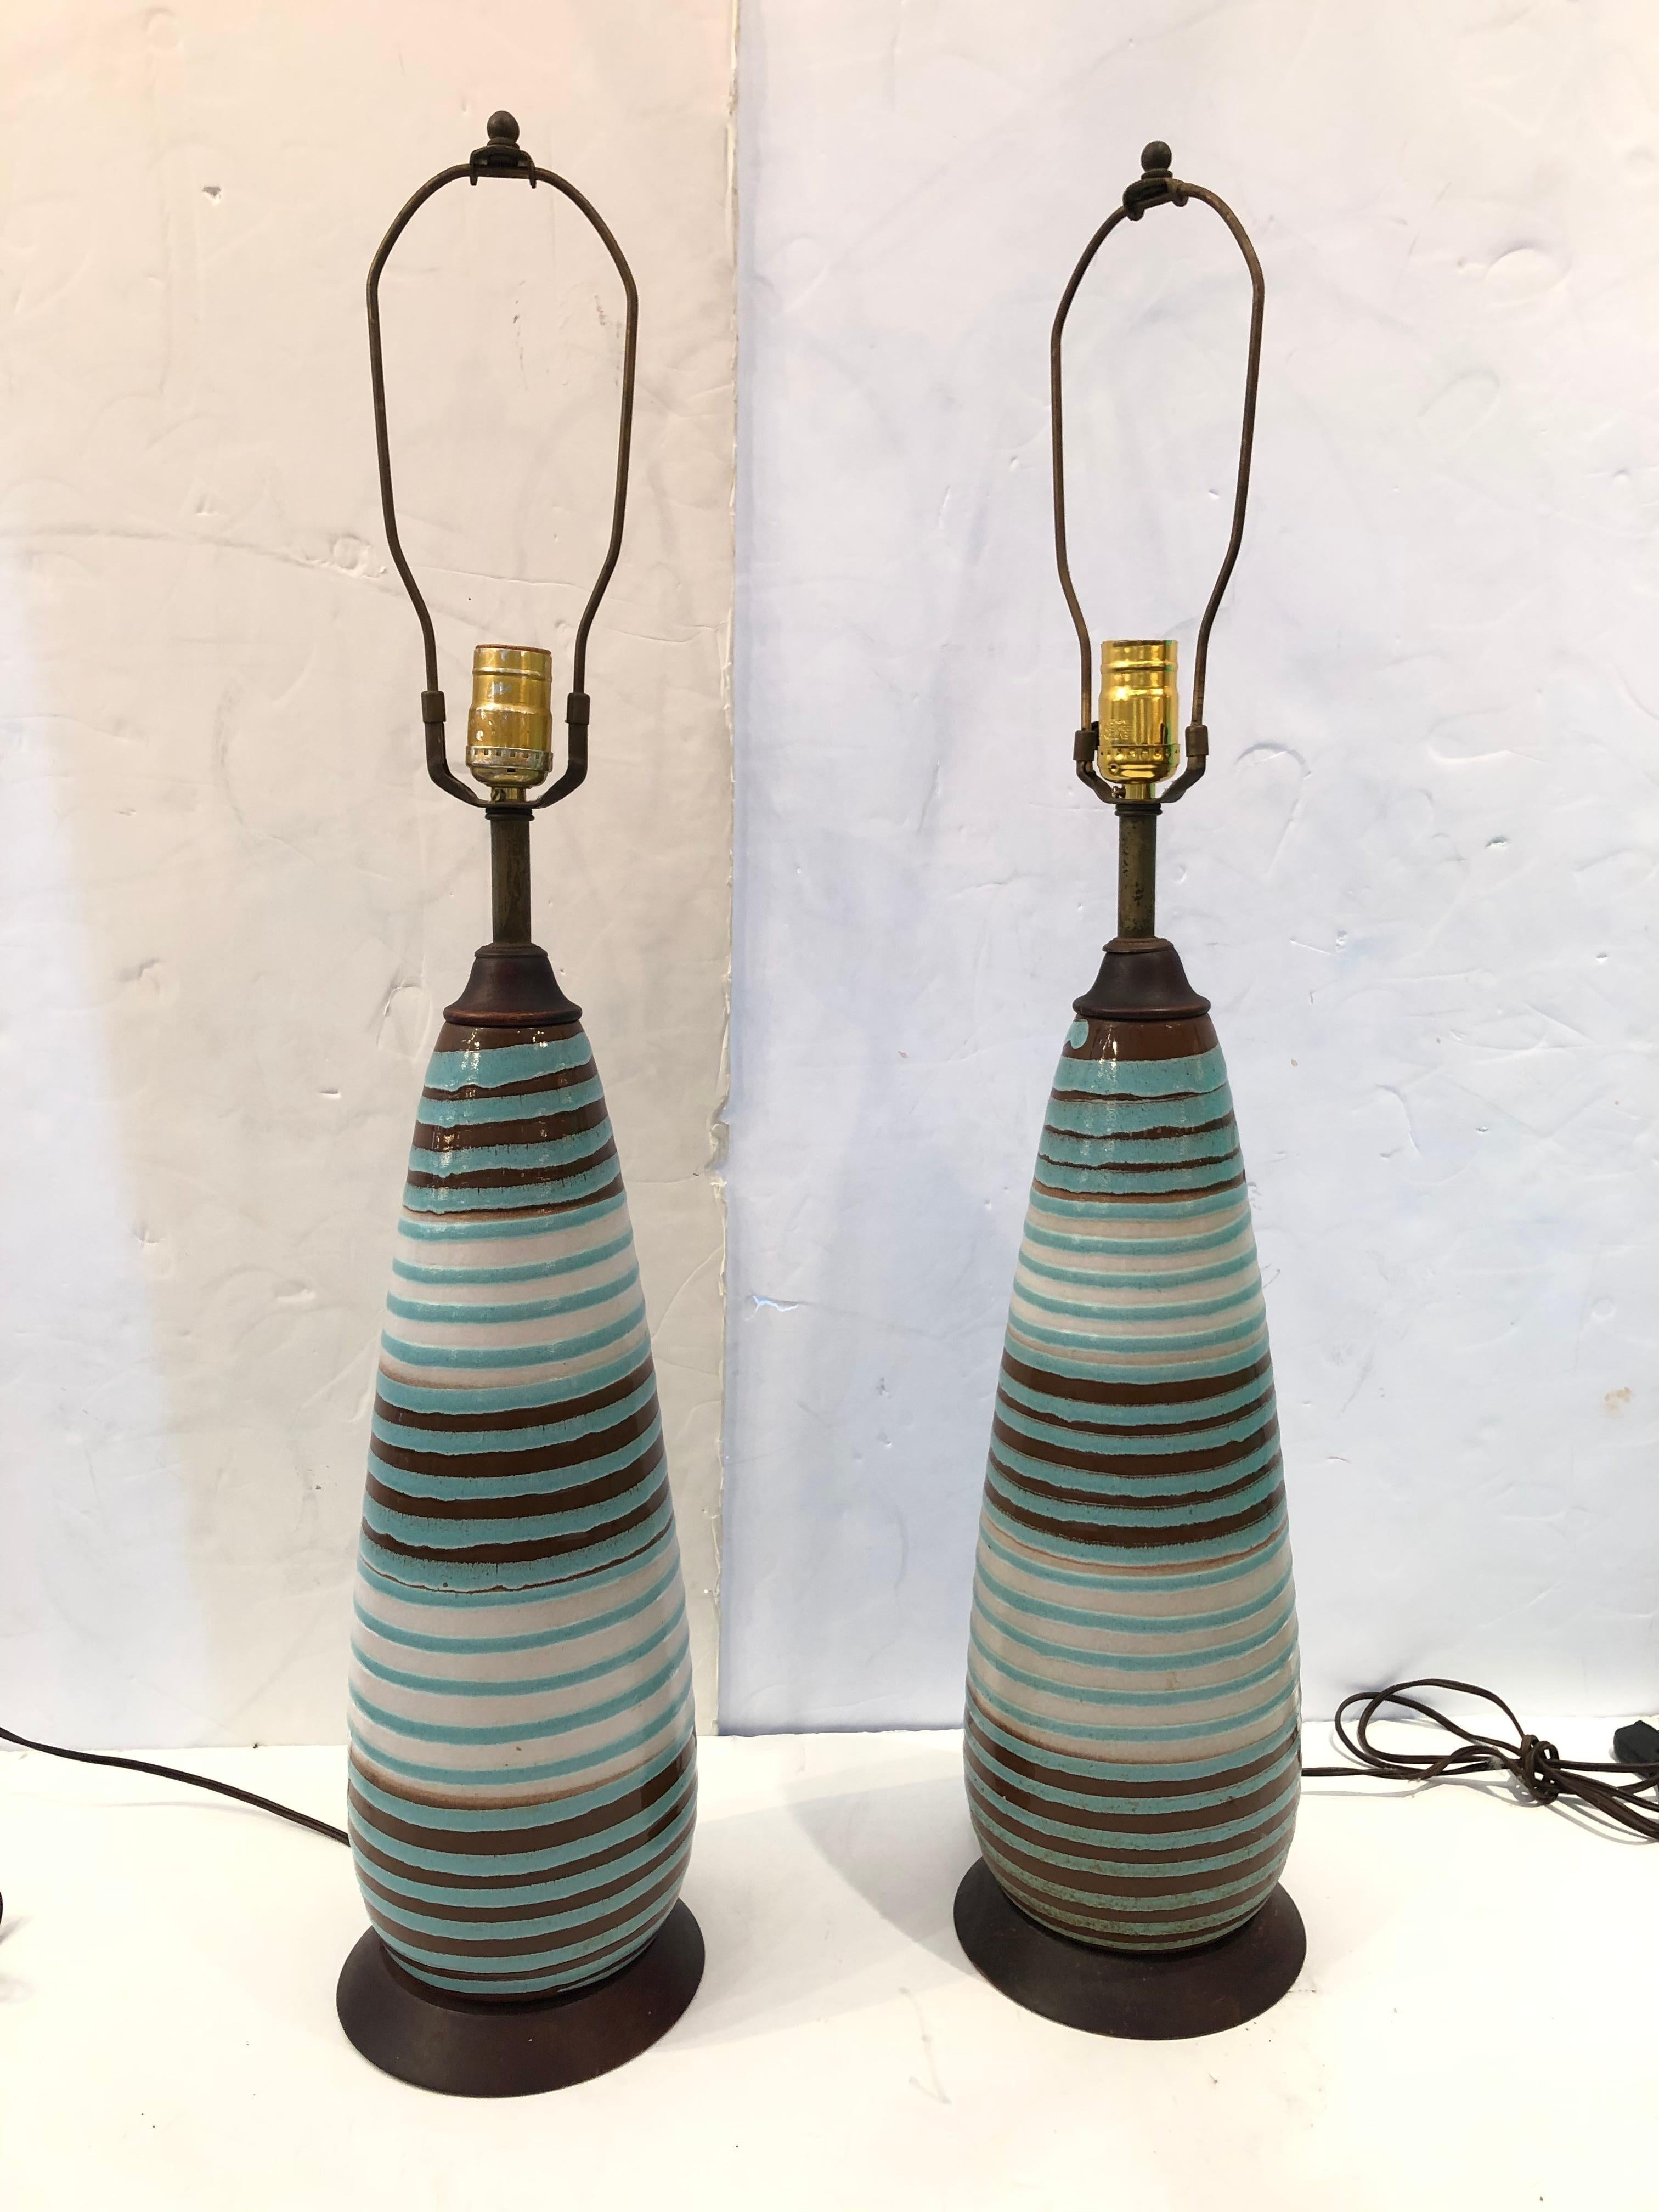 Groovy Mid-Century Modern rare pair of hand crafted glazed pottery table lamps having yummy color combo including cerulean blue, brown and cream, accented top and bottom by richly stained wood. Sensual elongated shape.
height to socket 24
No